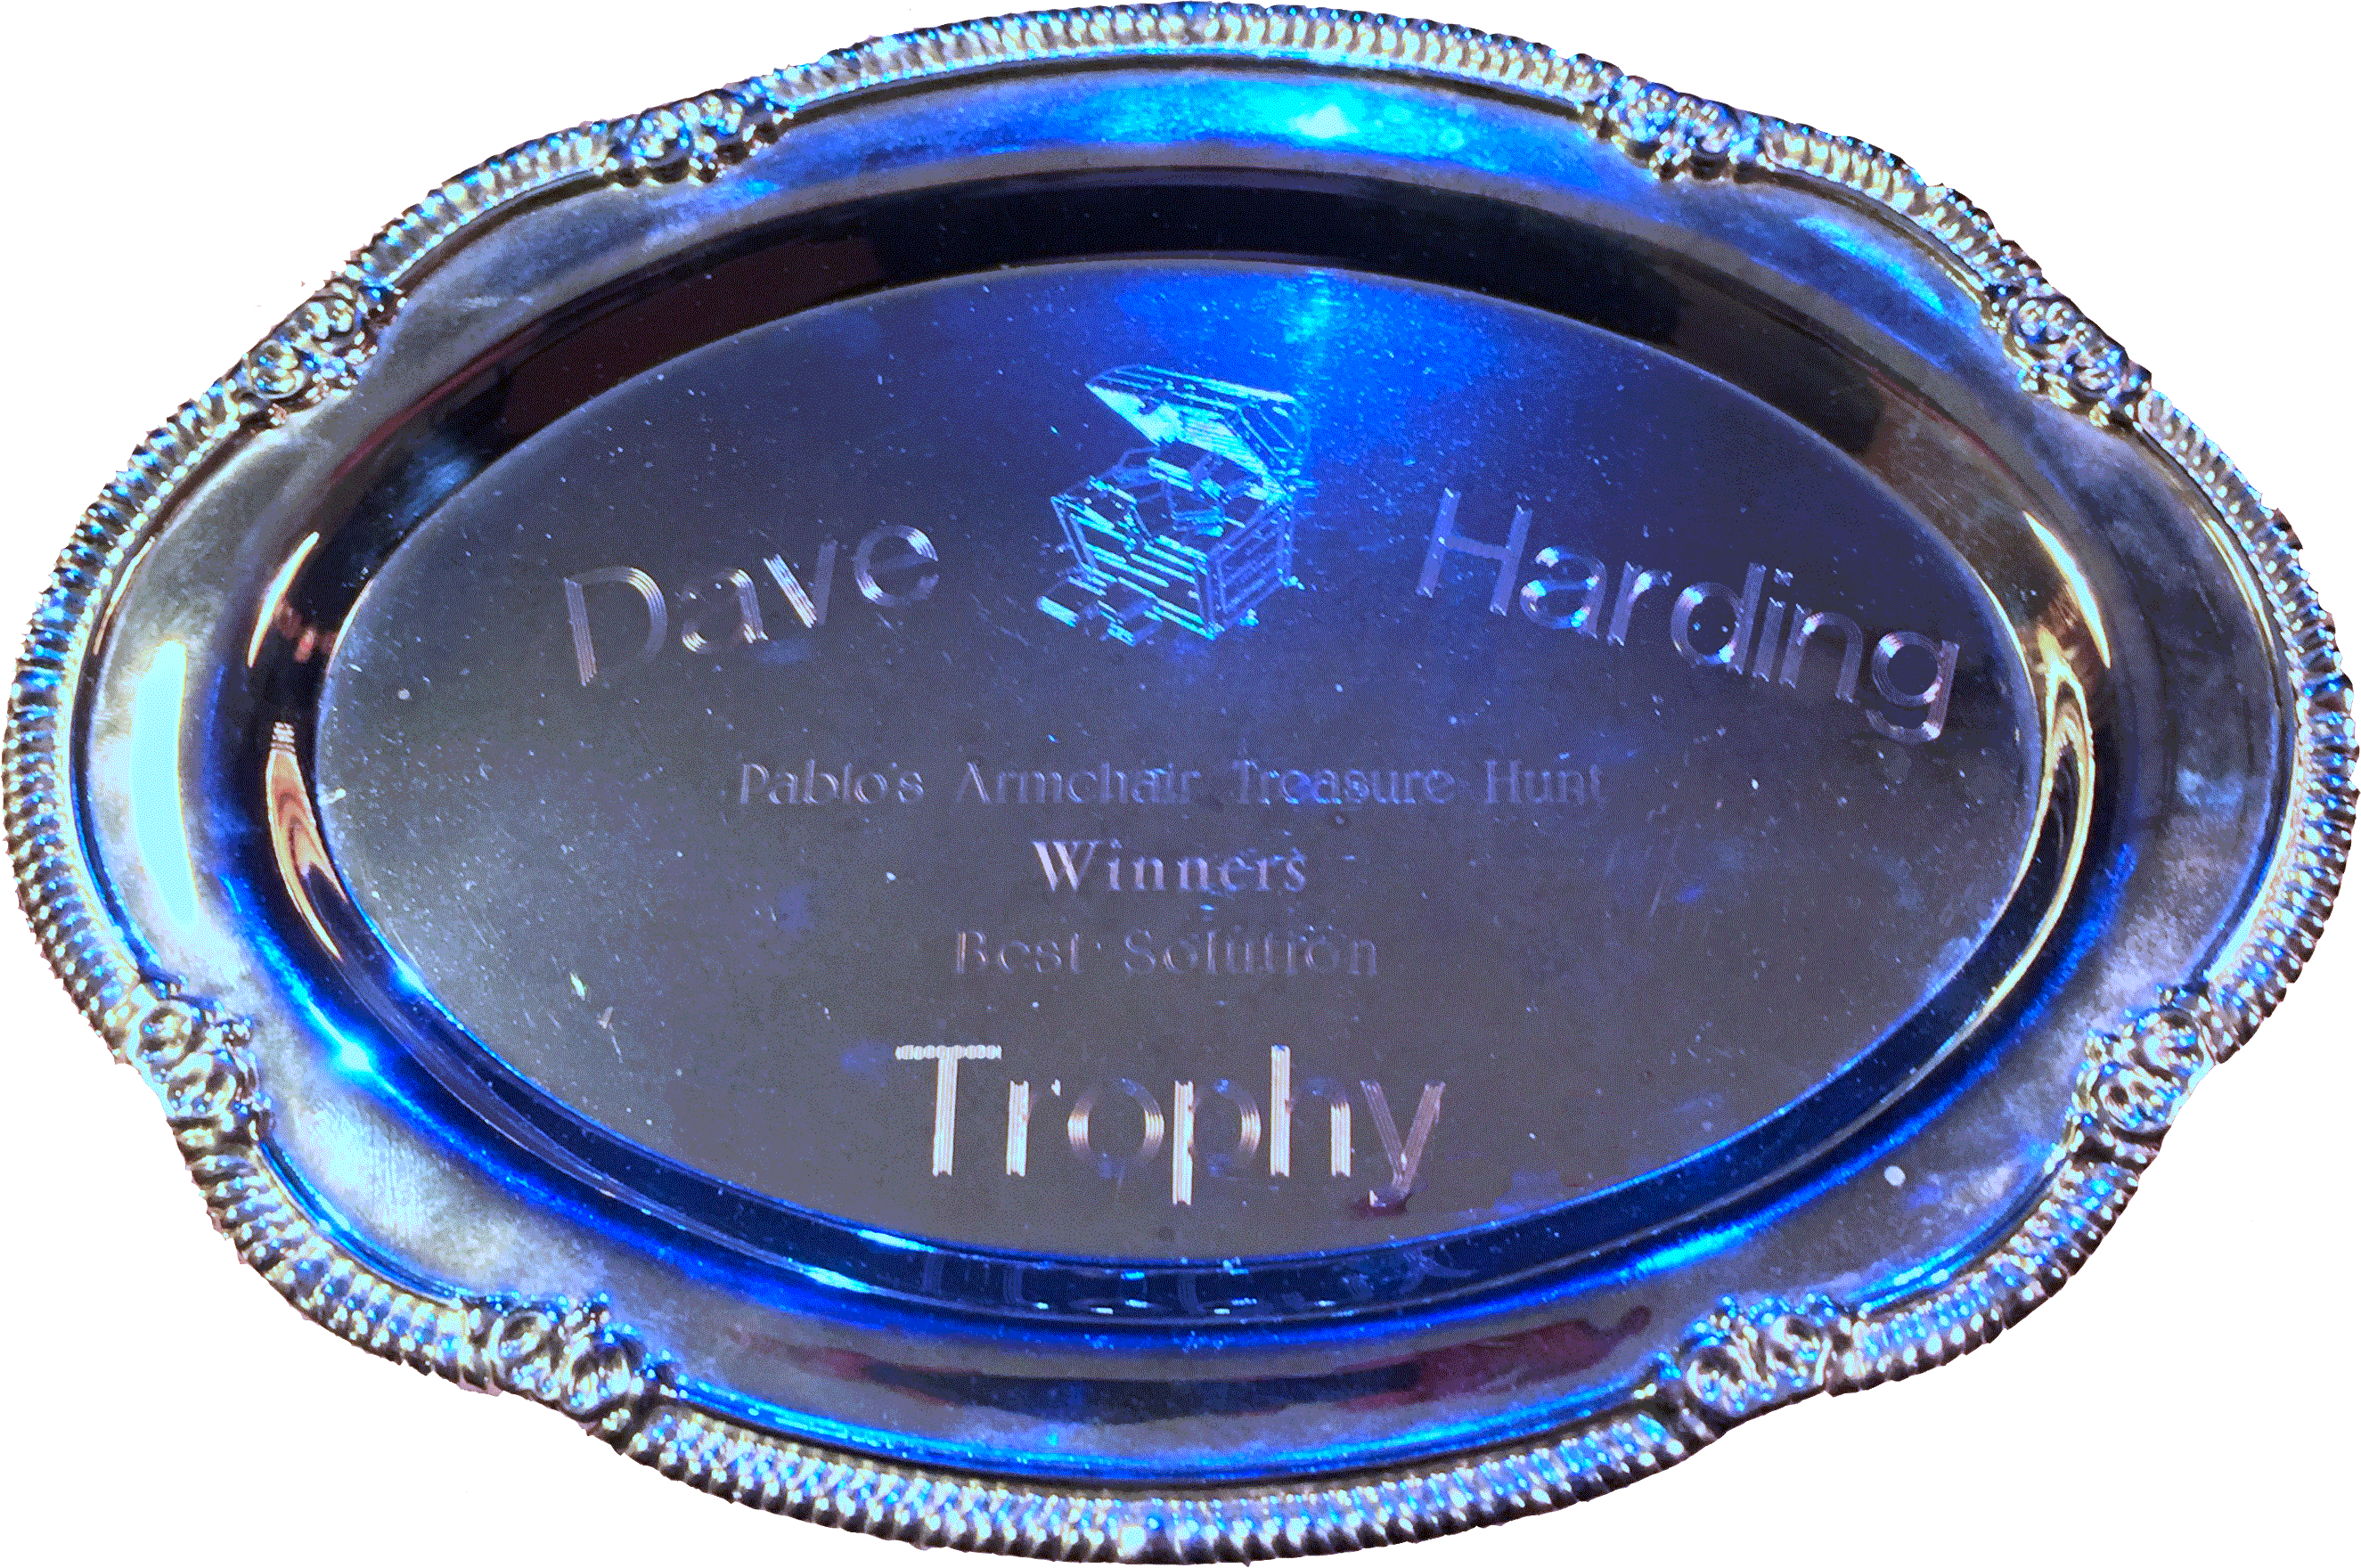 The Dave Harding Trophy